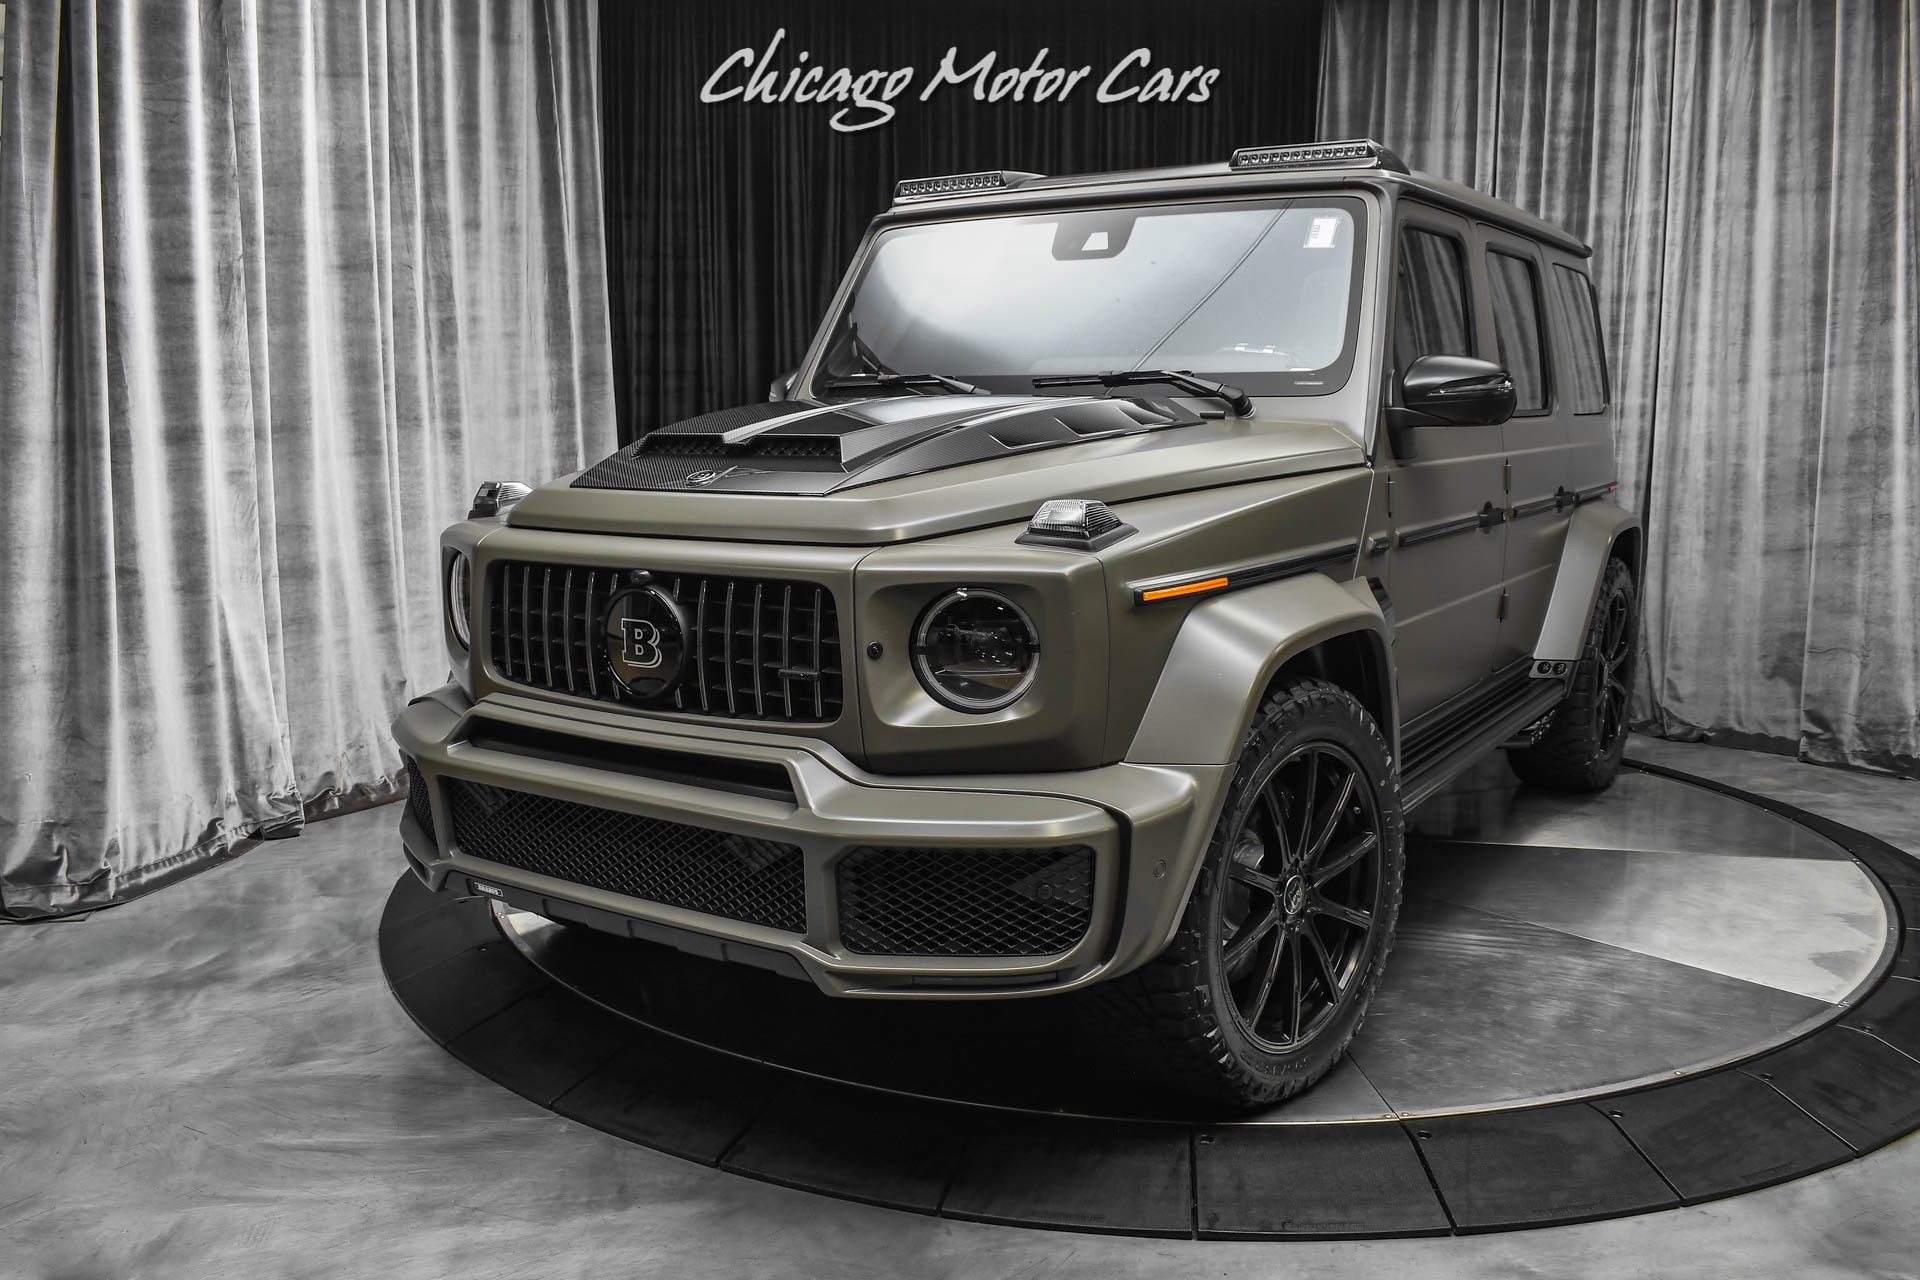 Used 2021 MercedesBenz G63 AMG SUV Matte Olive Green Brabus Package